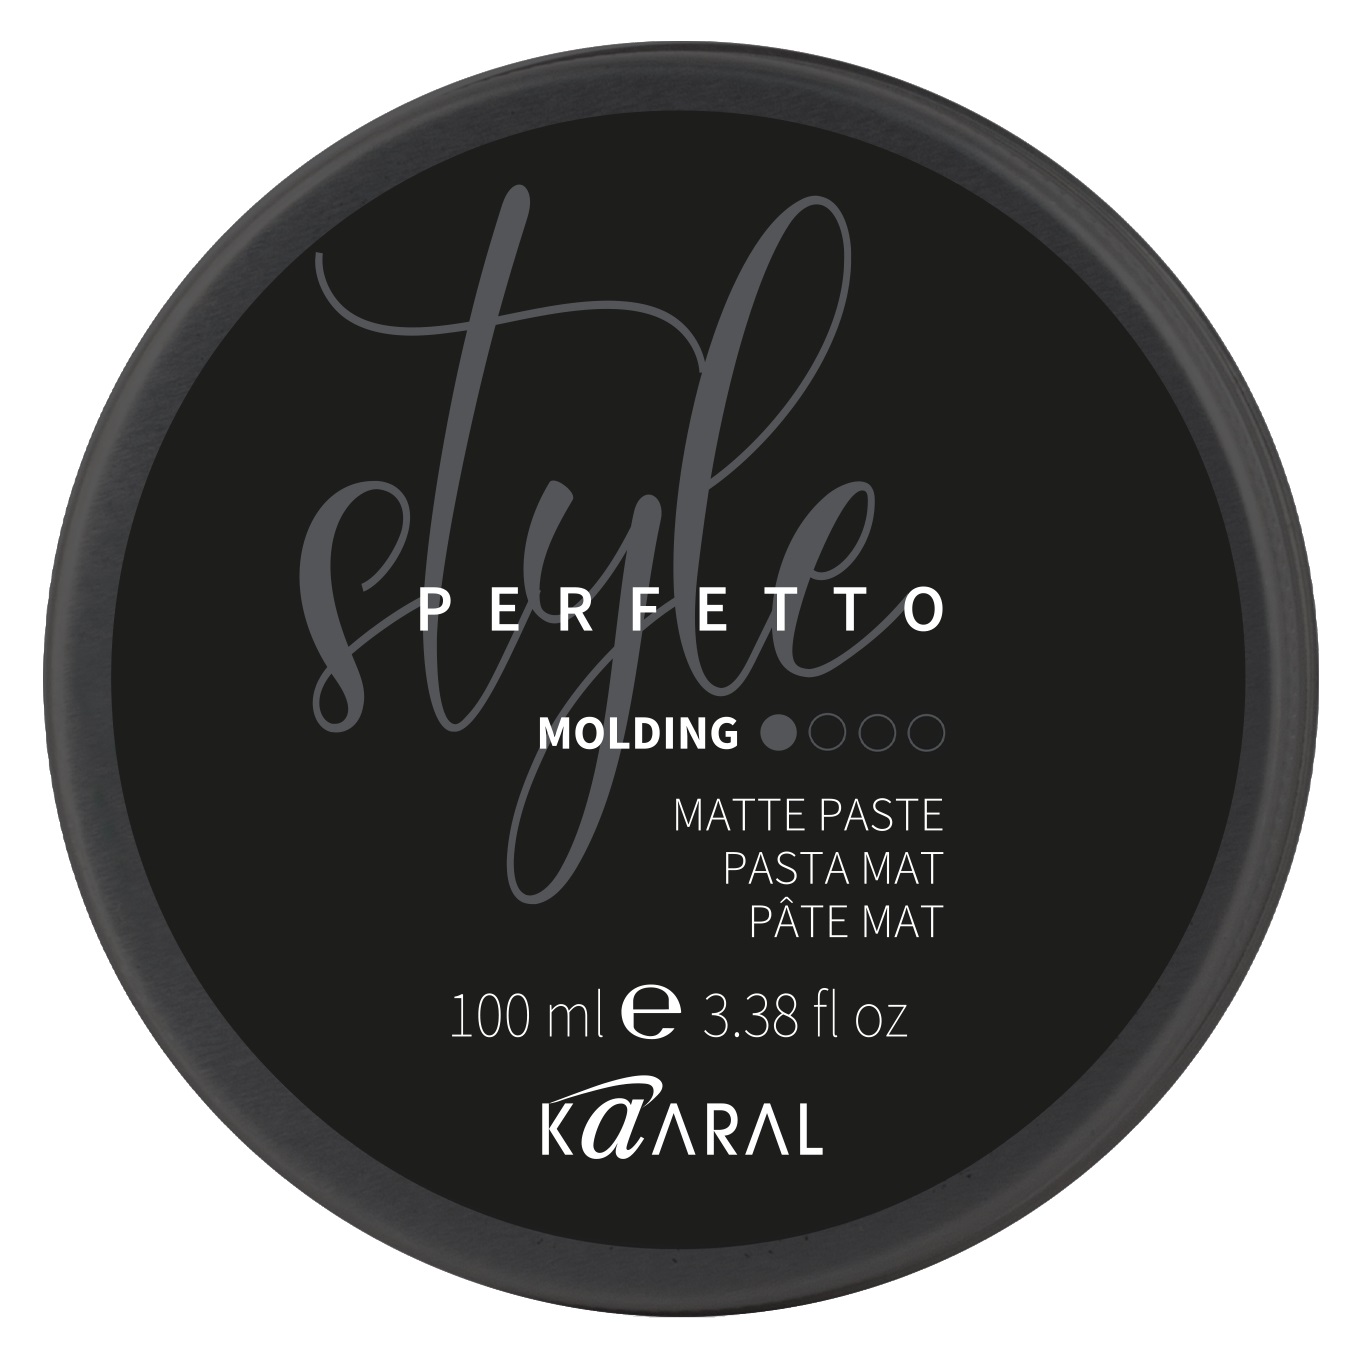 Kaaral Матовая паста Molding Matte Paste, 100 мл (Kaaral, Style Perfetto) kaaral style perfetto mjlding matte paste матовая паста 80 мл